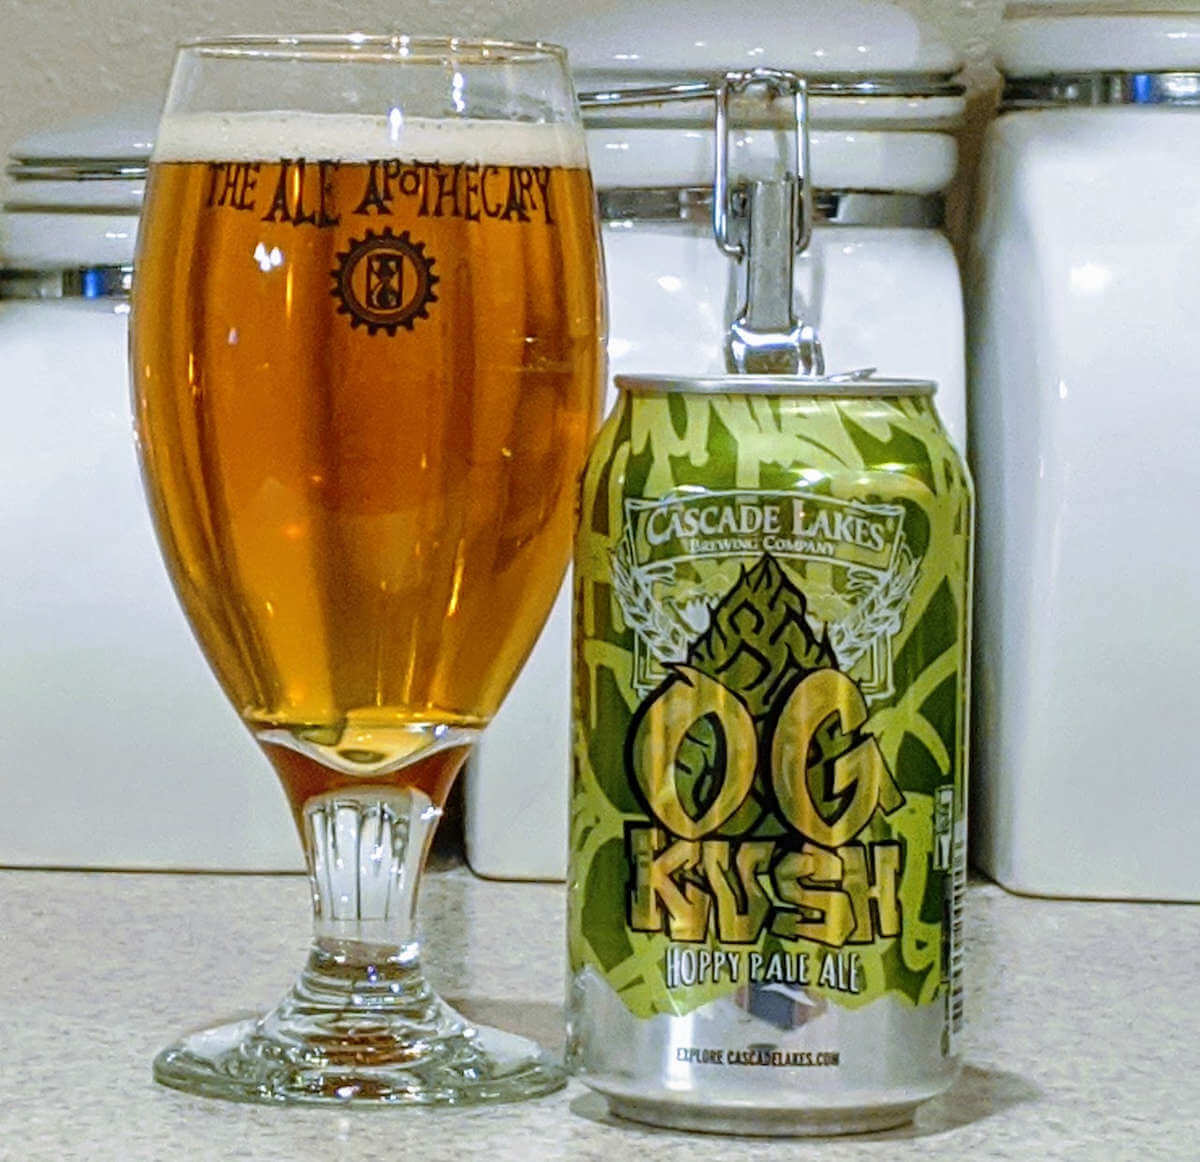 Latest print article: Modern pale ales with Cascade Lakes’ OG Kush